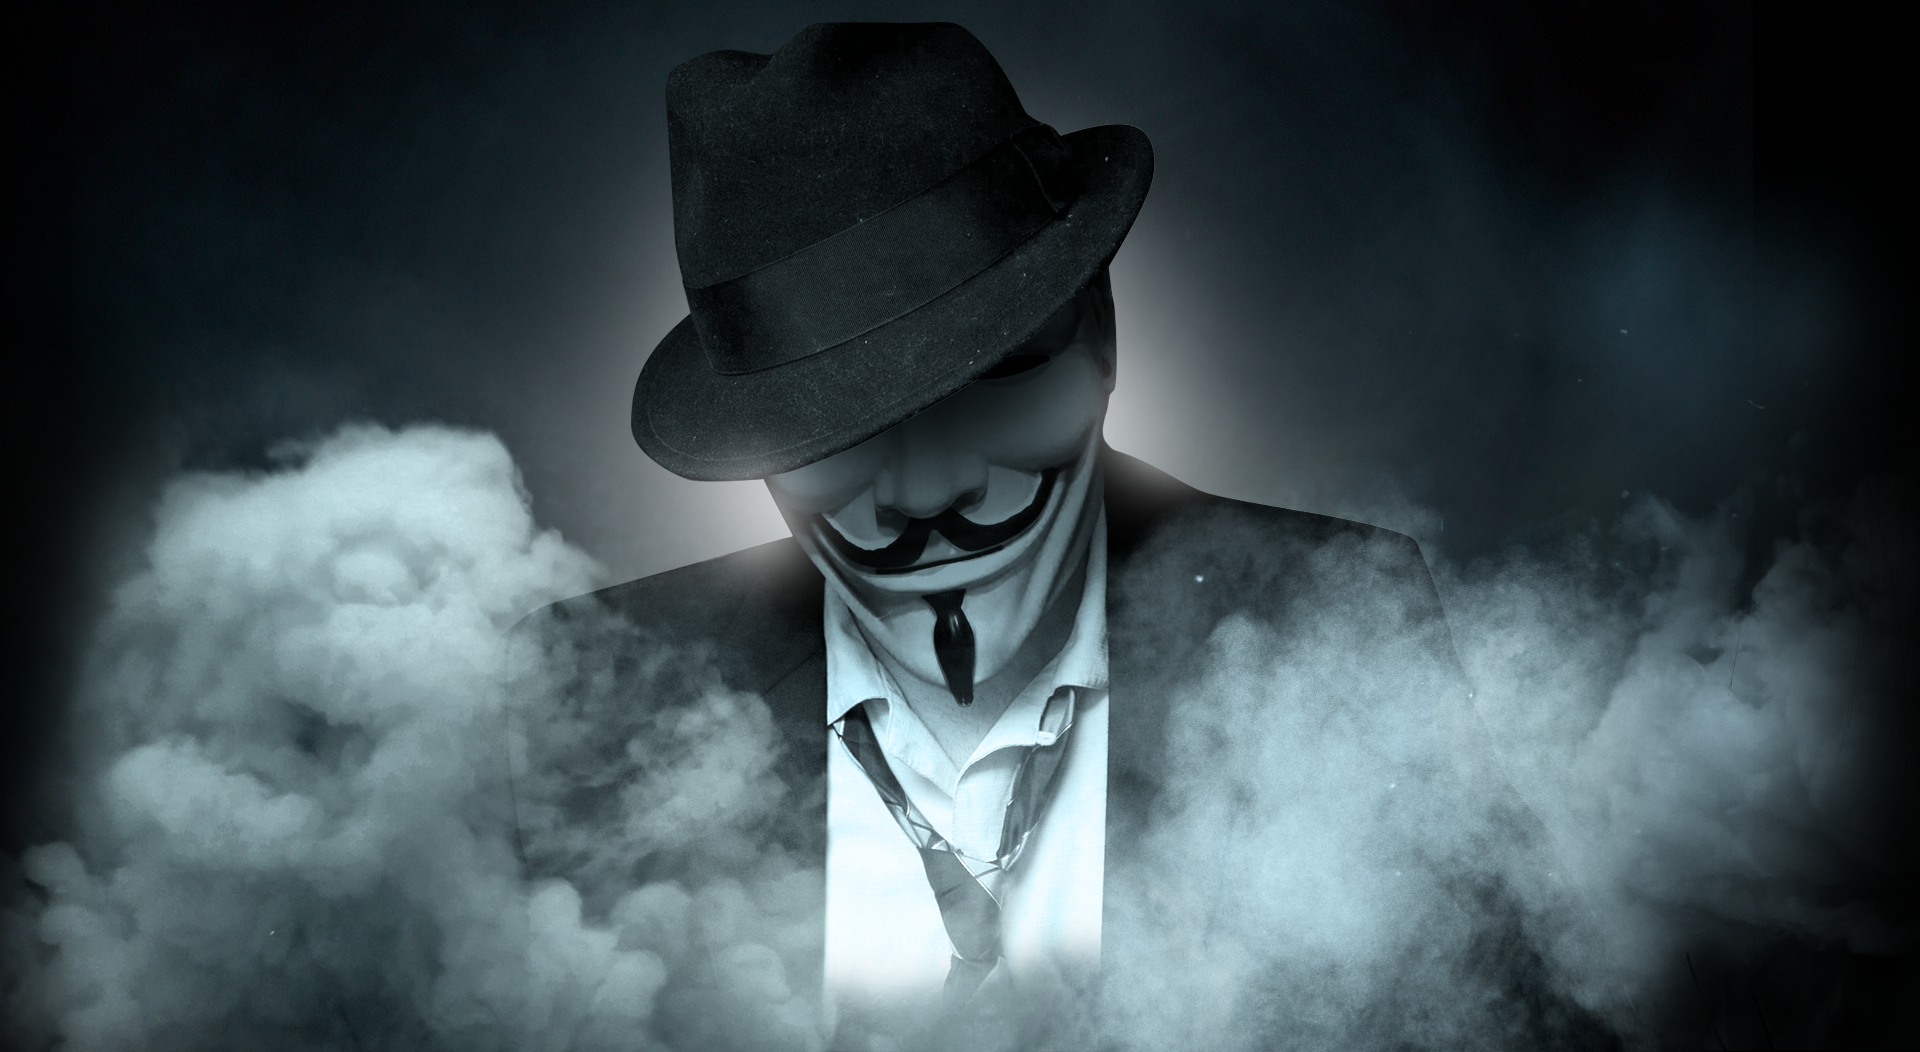 General 1920x1052 Anonymous (hacker group) Guy Fawkes mask smoke hat tie suits mask